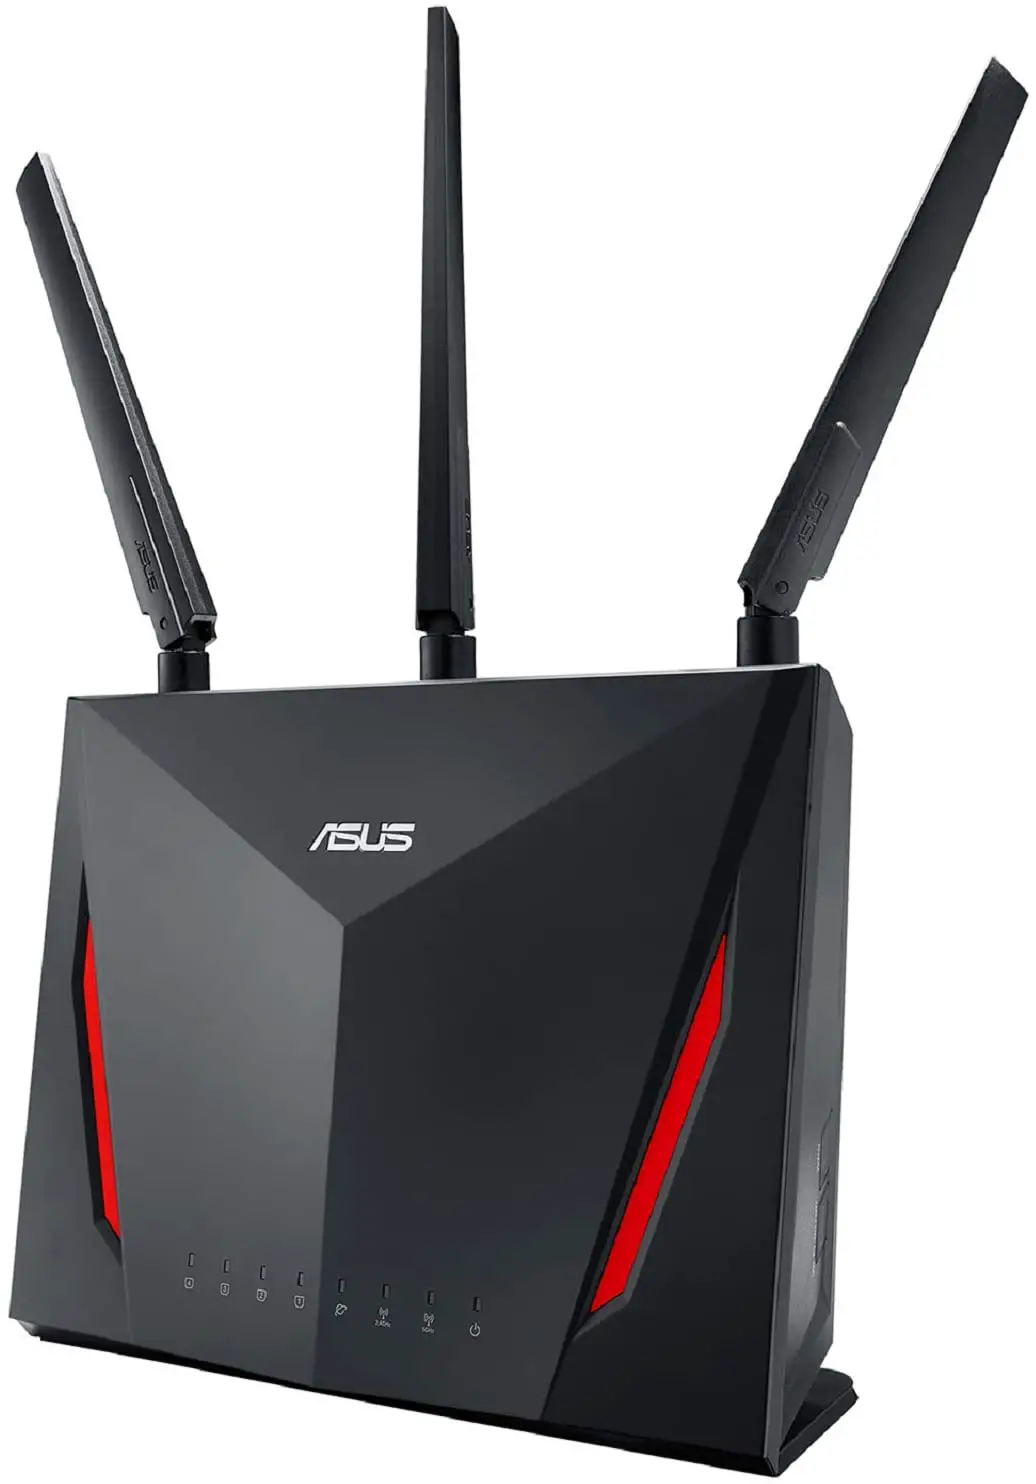 Asus RT-AC86U AC2900 Wireless Router